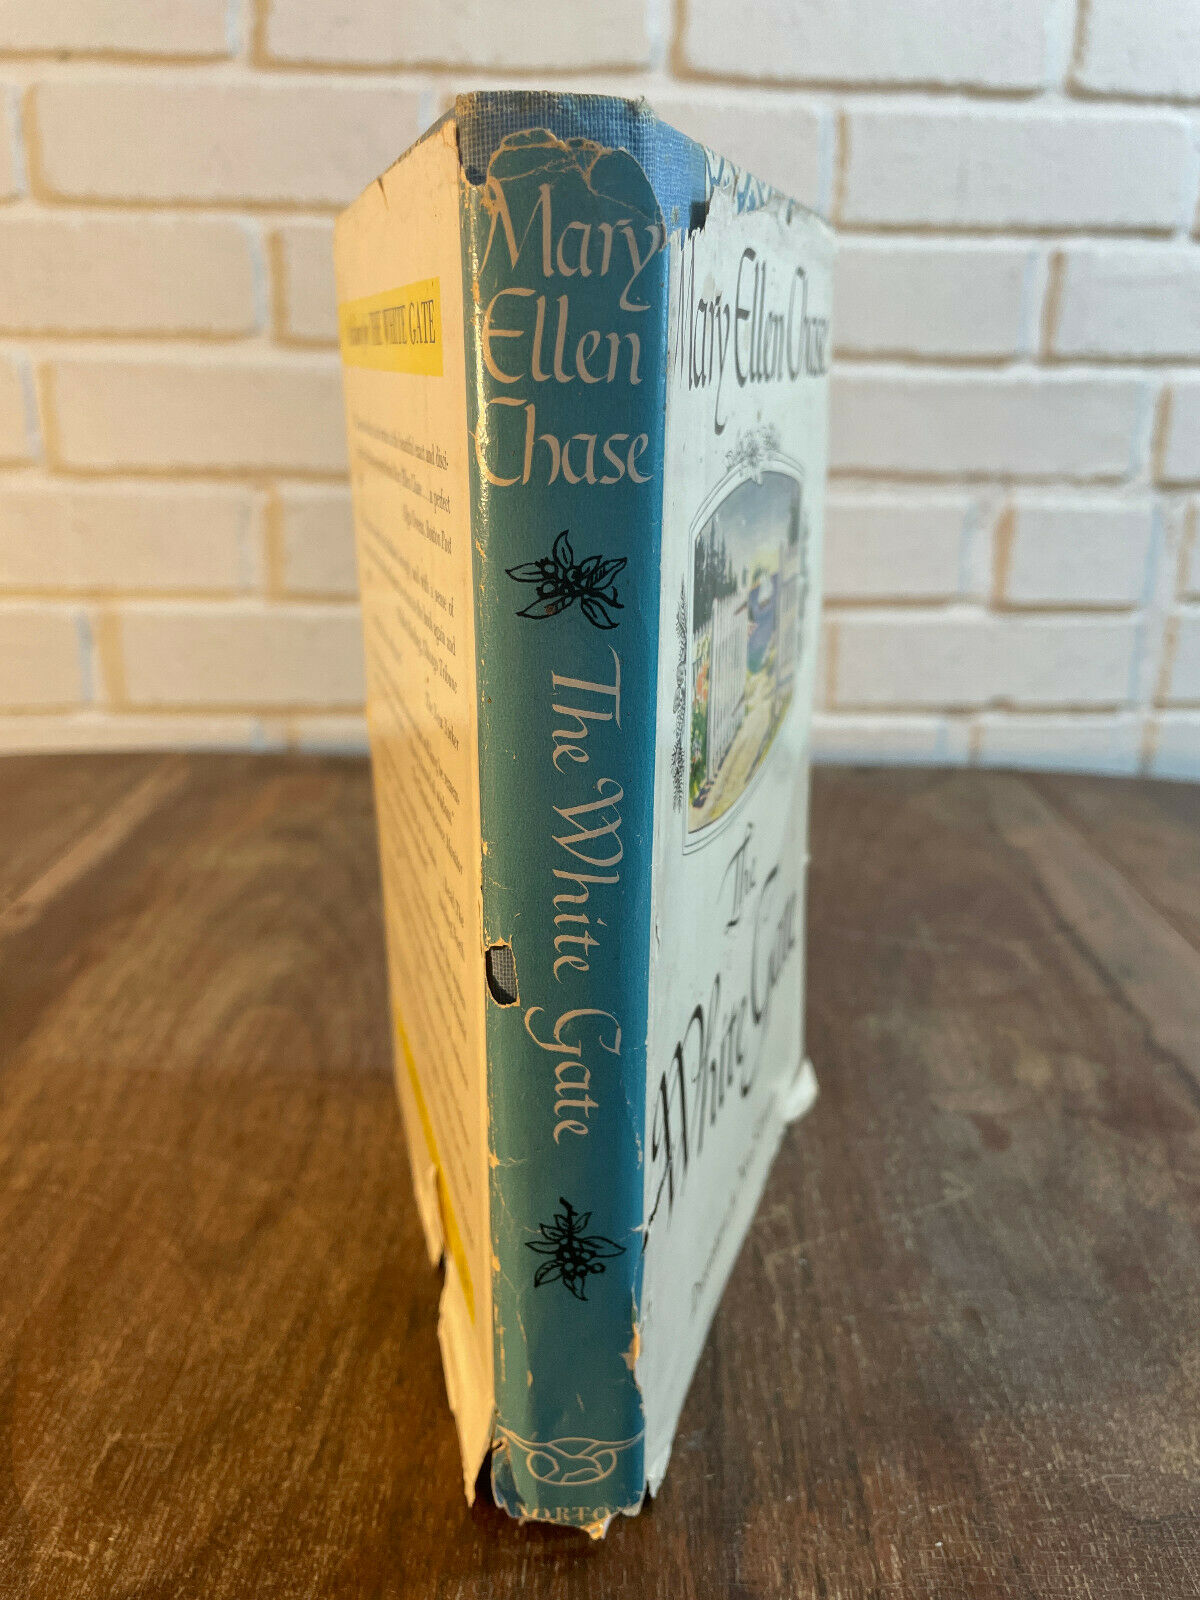 The White Gate by Mary Ellen Chase hardcover Book (J7)